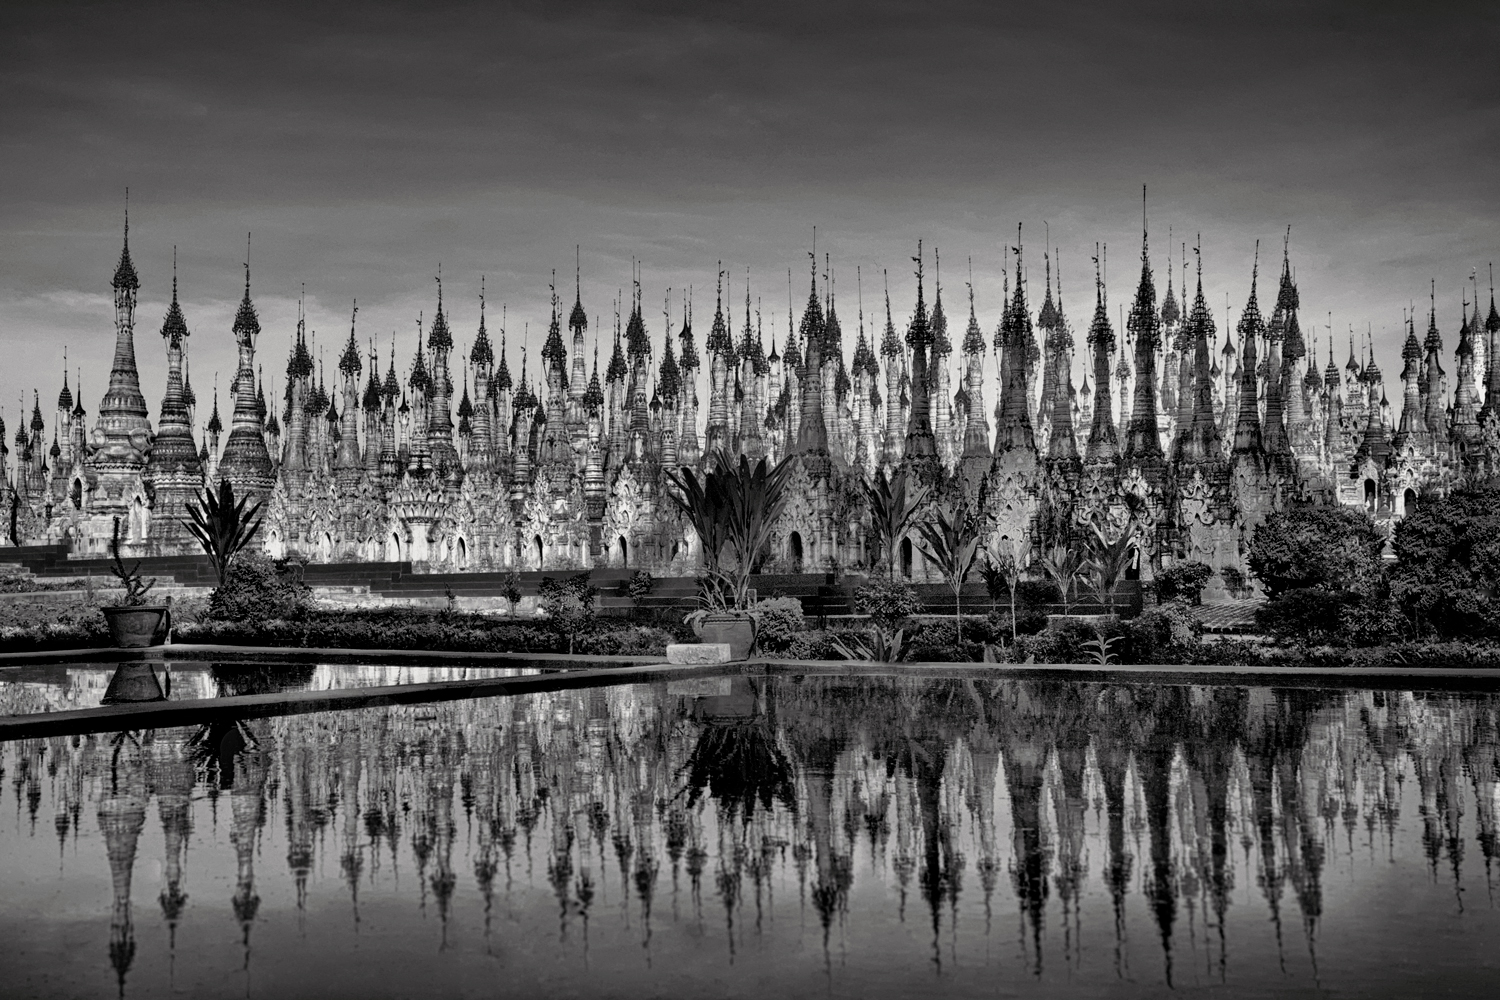 a large building with many spires